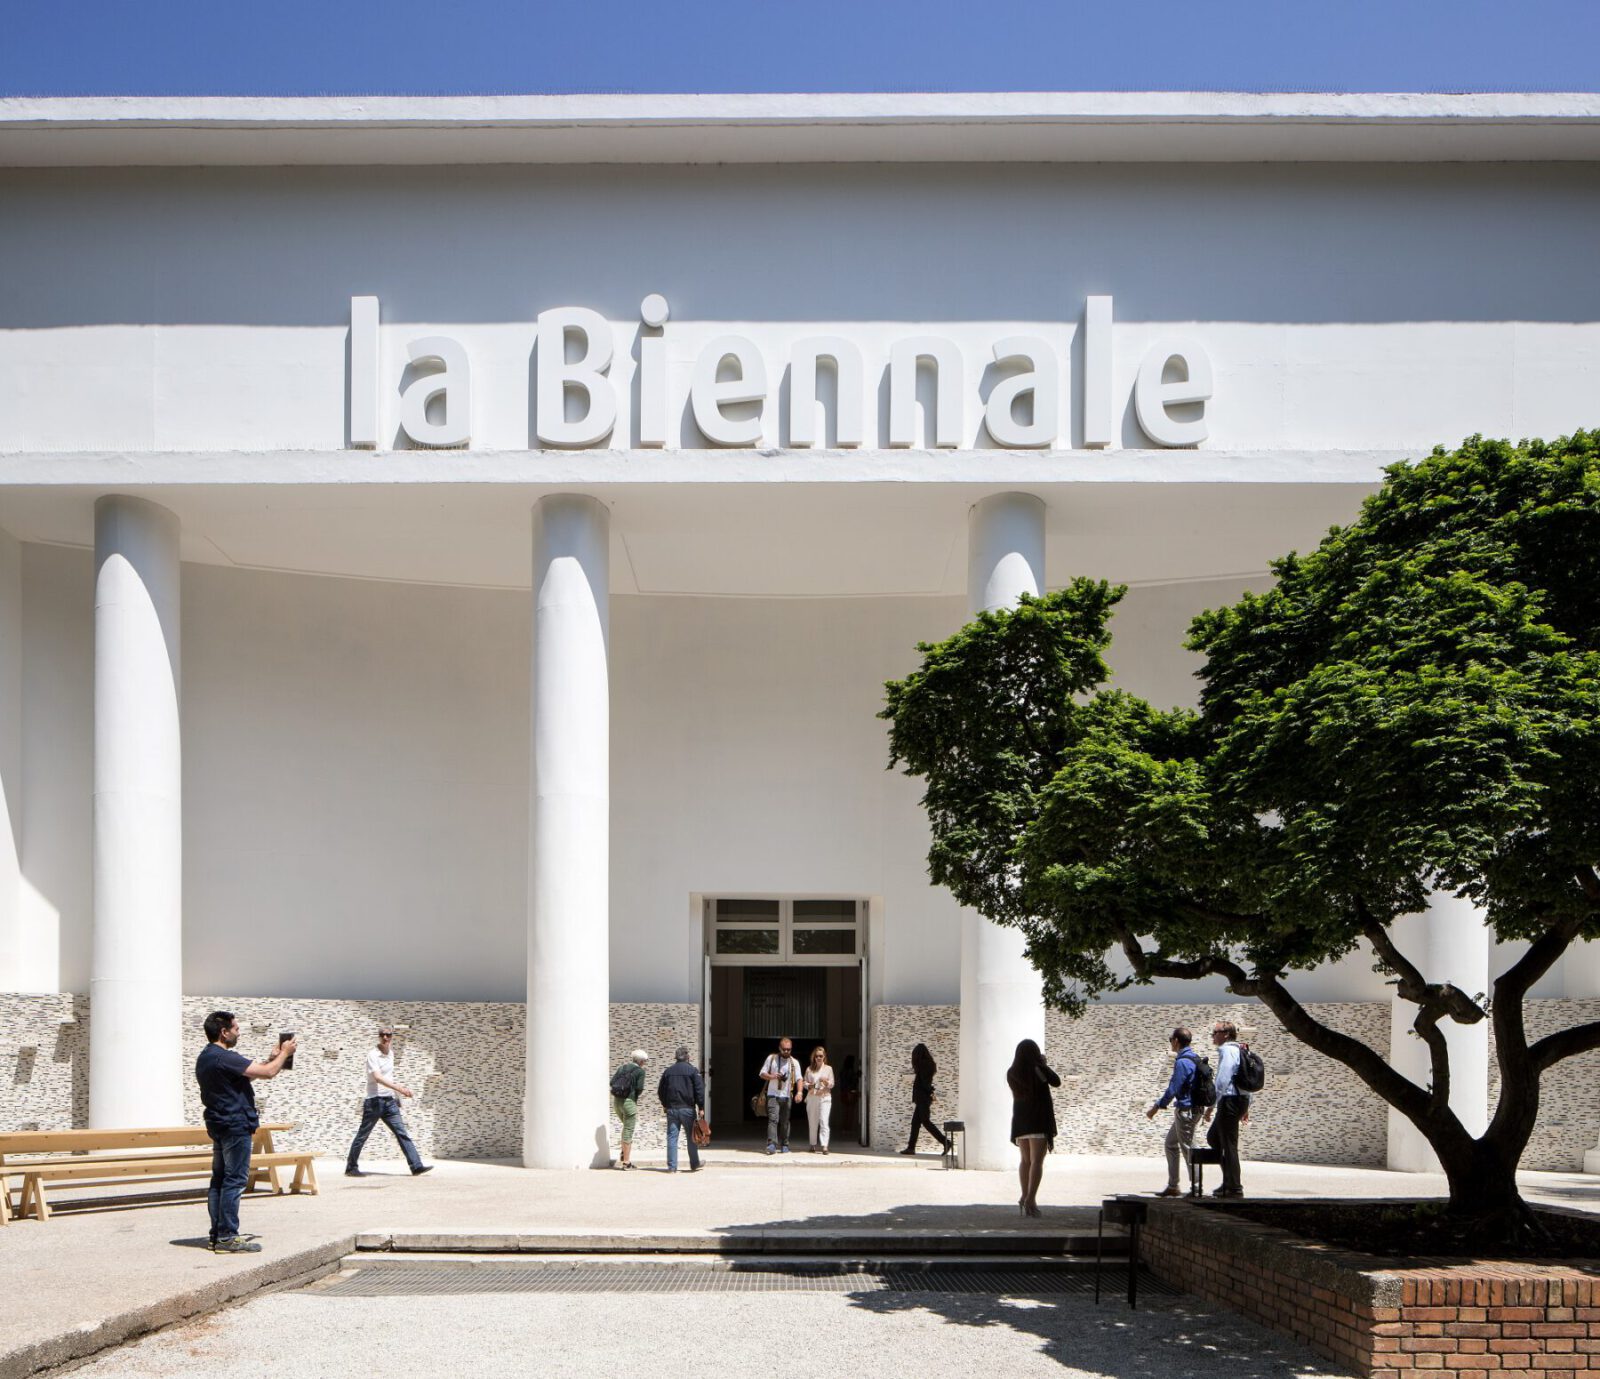 Archisearch Biennale Architettura 2021: the 17th International Architecture Exhibition will be held between May 22nd 2021 to November 21st 2021